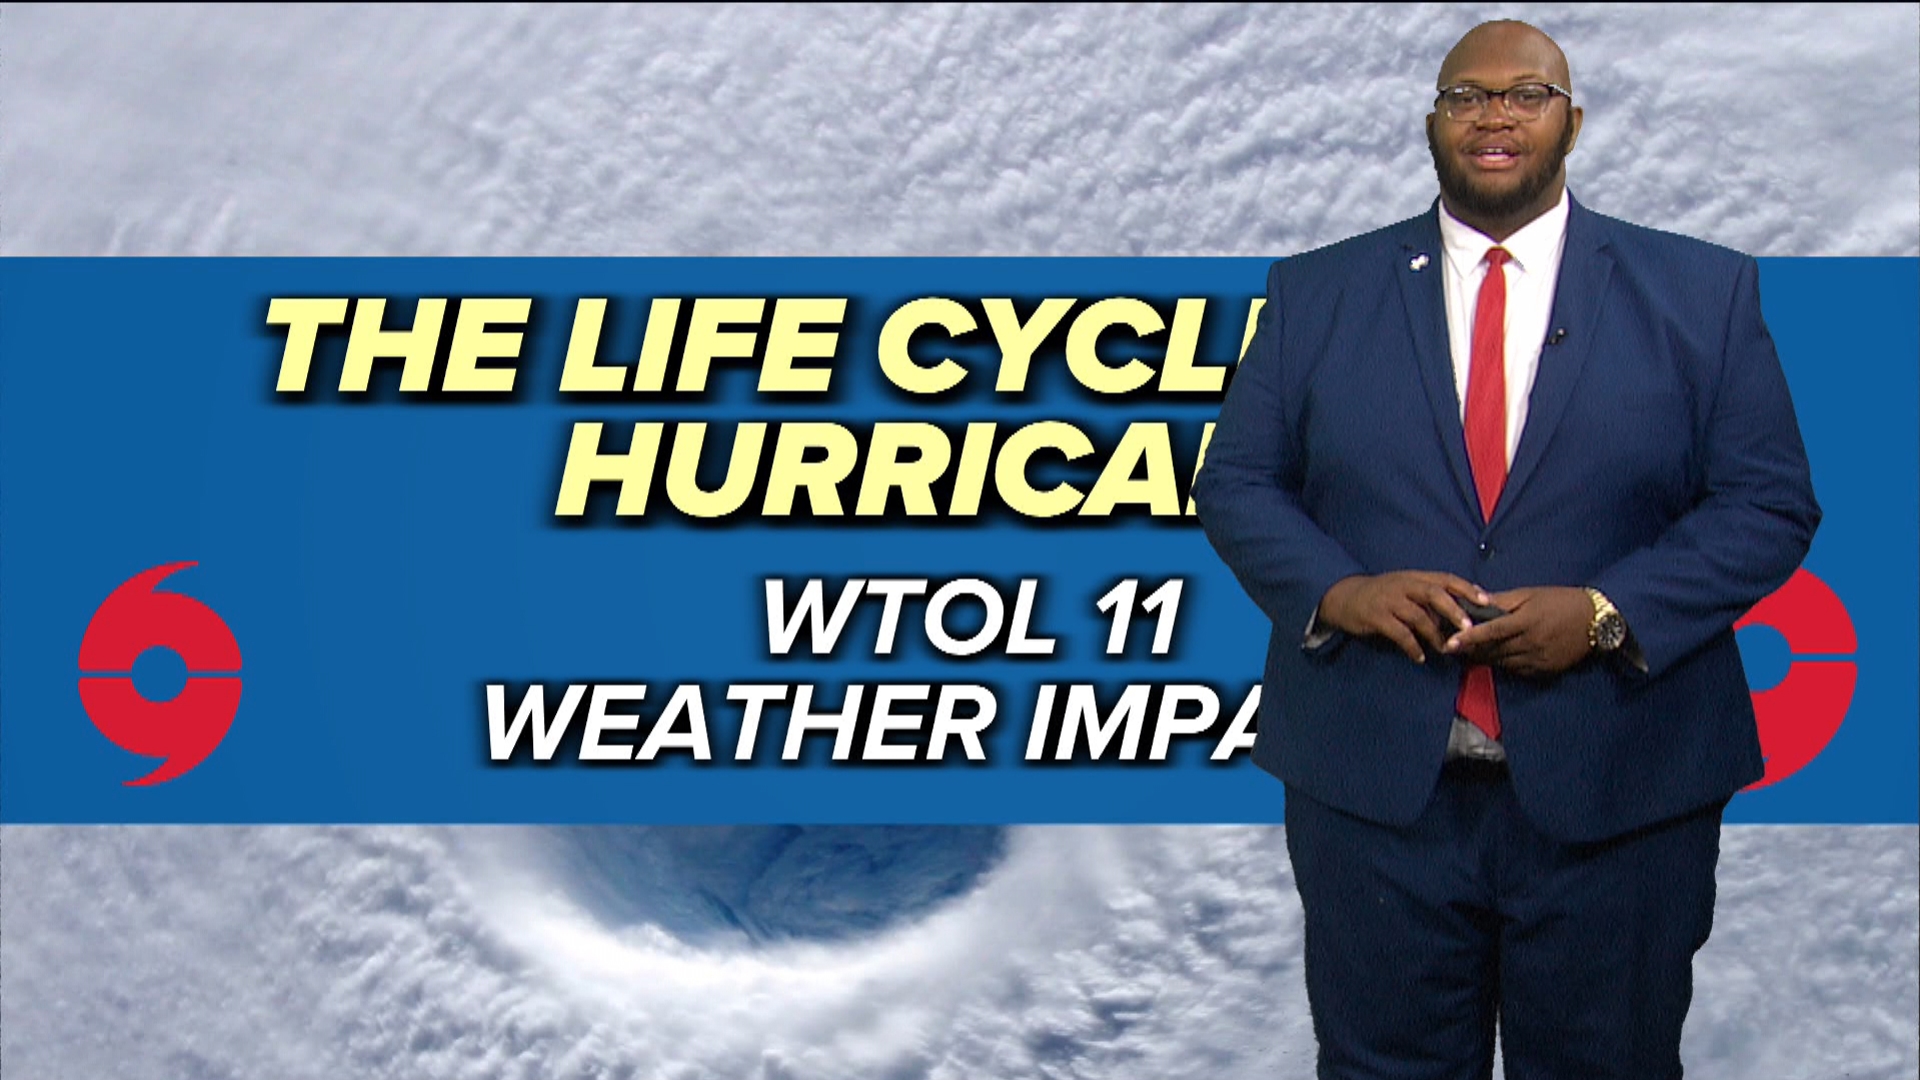 In this week's WTOL 11 Weather Impact, meteorologist Matt Willoughby breaks down the stages of a hurricane and the impacts that can be felt in our area.